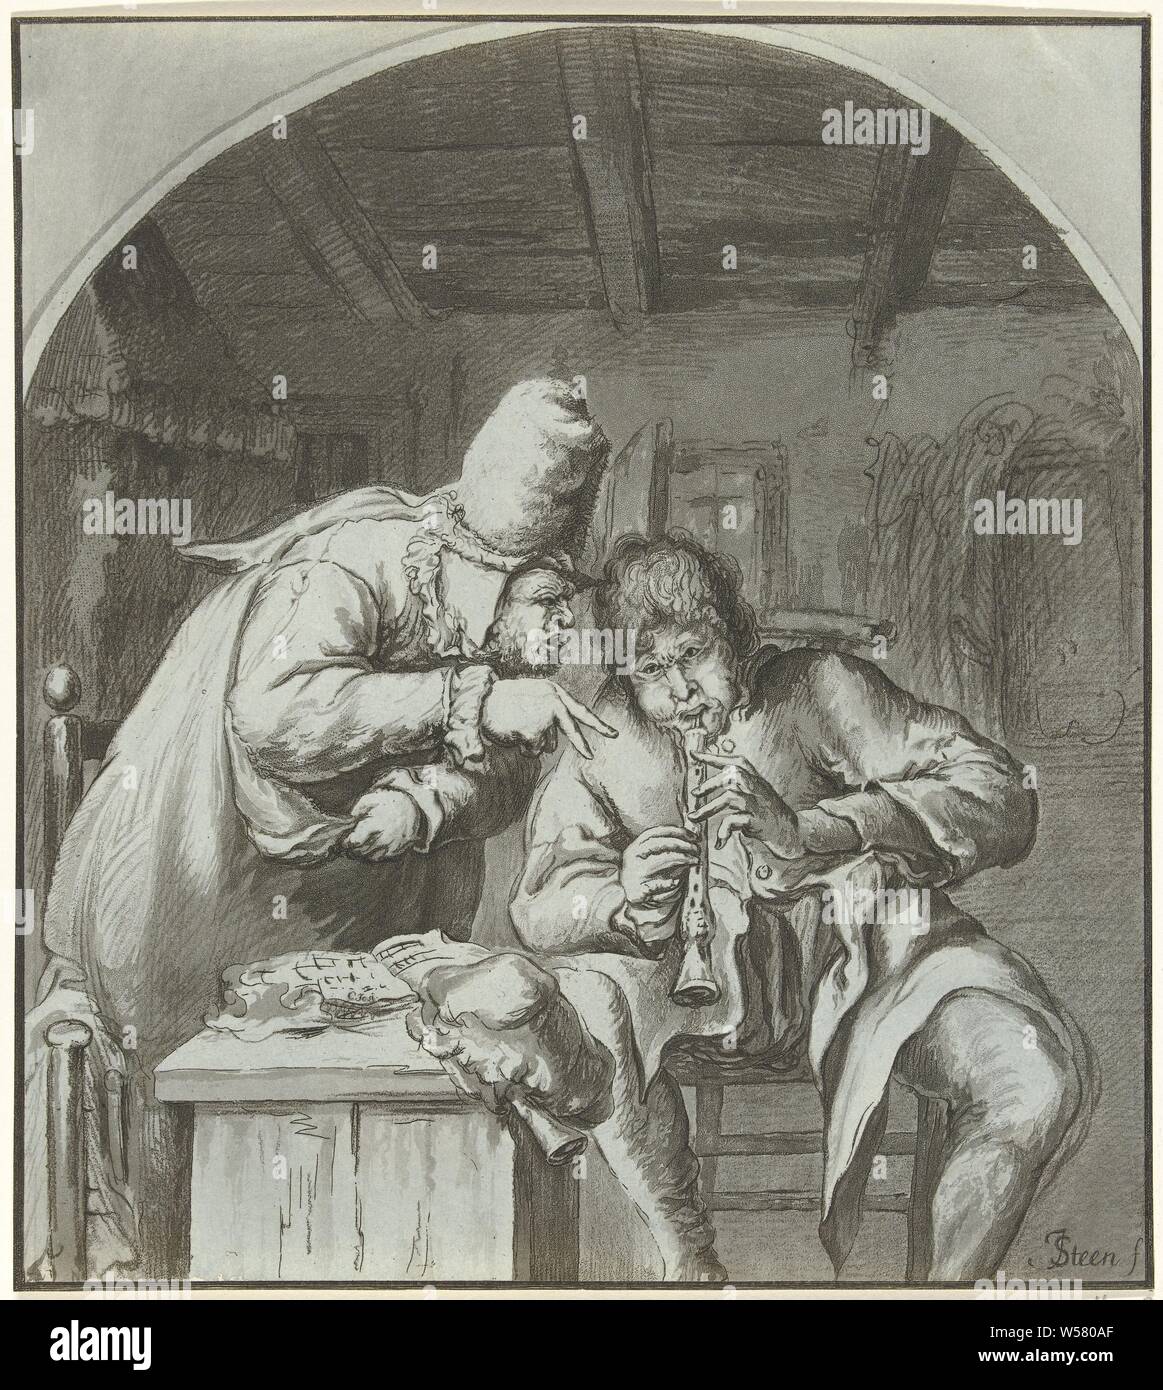 Clarinet lesson, Interior with two men, one of them playing the clarinet. The other is teaching him. On the table in front of them lies open sheet music., Clarinet, bassoon, oboe, shawm (music), Christiaan Josi (mentioned on object), Noord-Nederland, 1821, paper, etching,  210 mm × w 188 mm Stock Photo